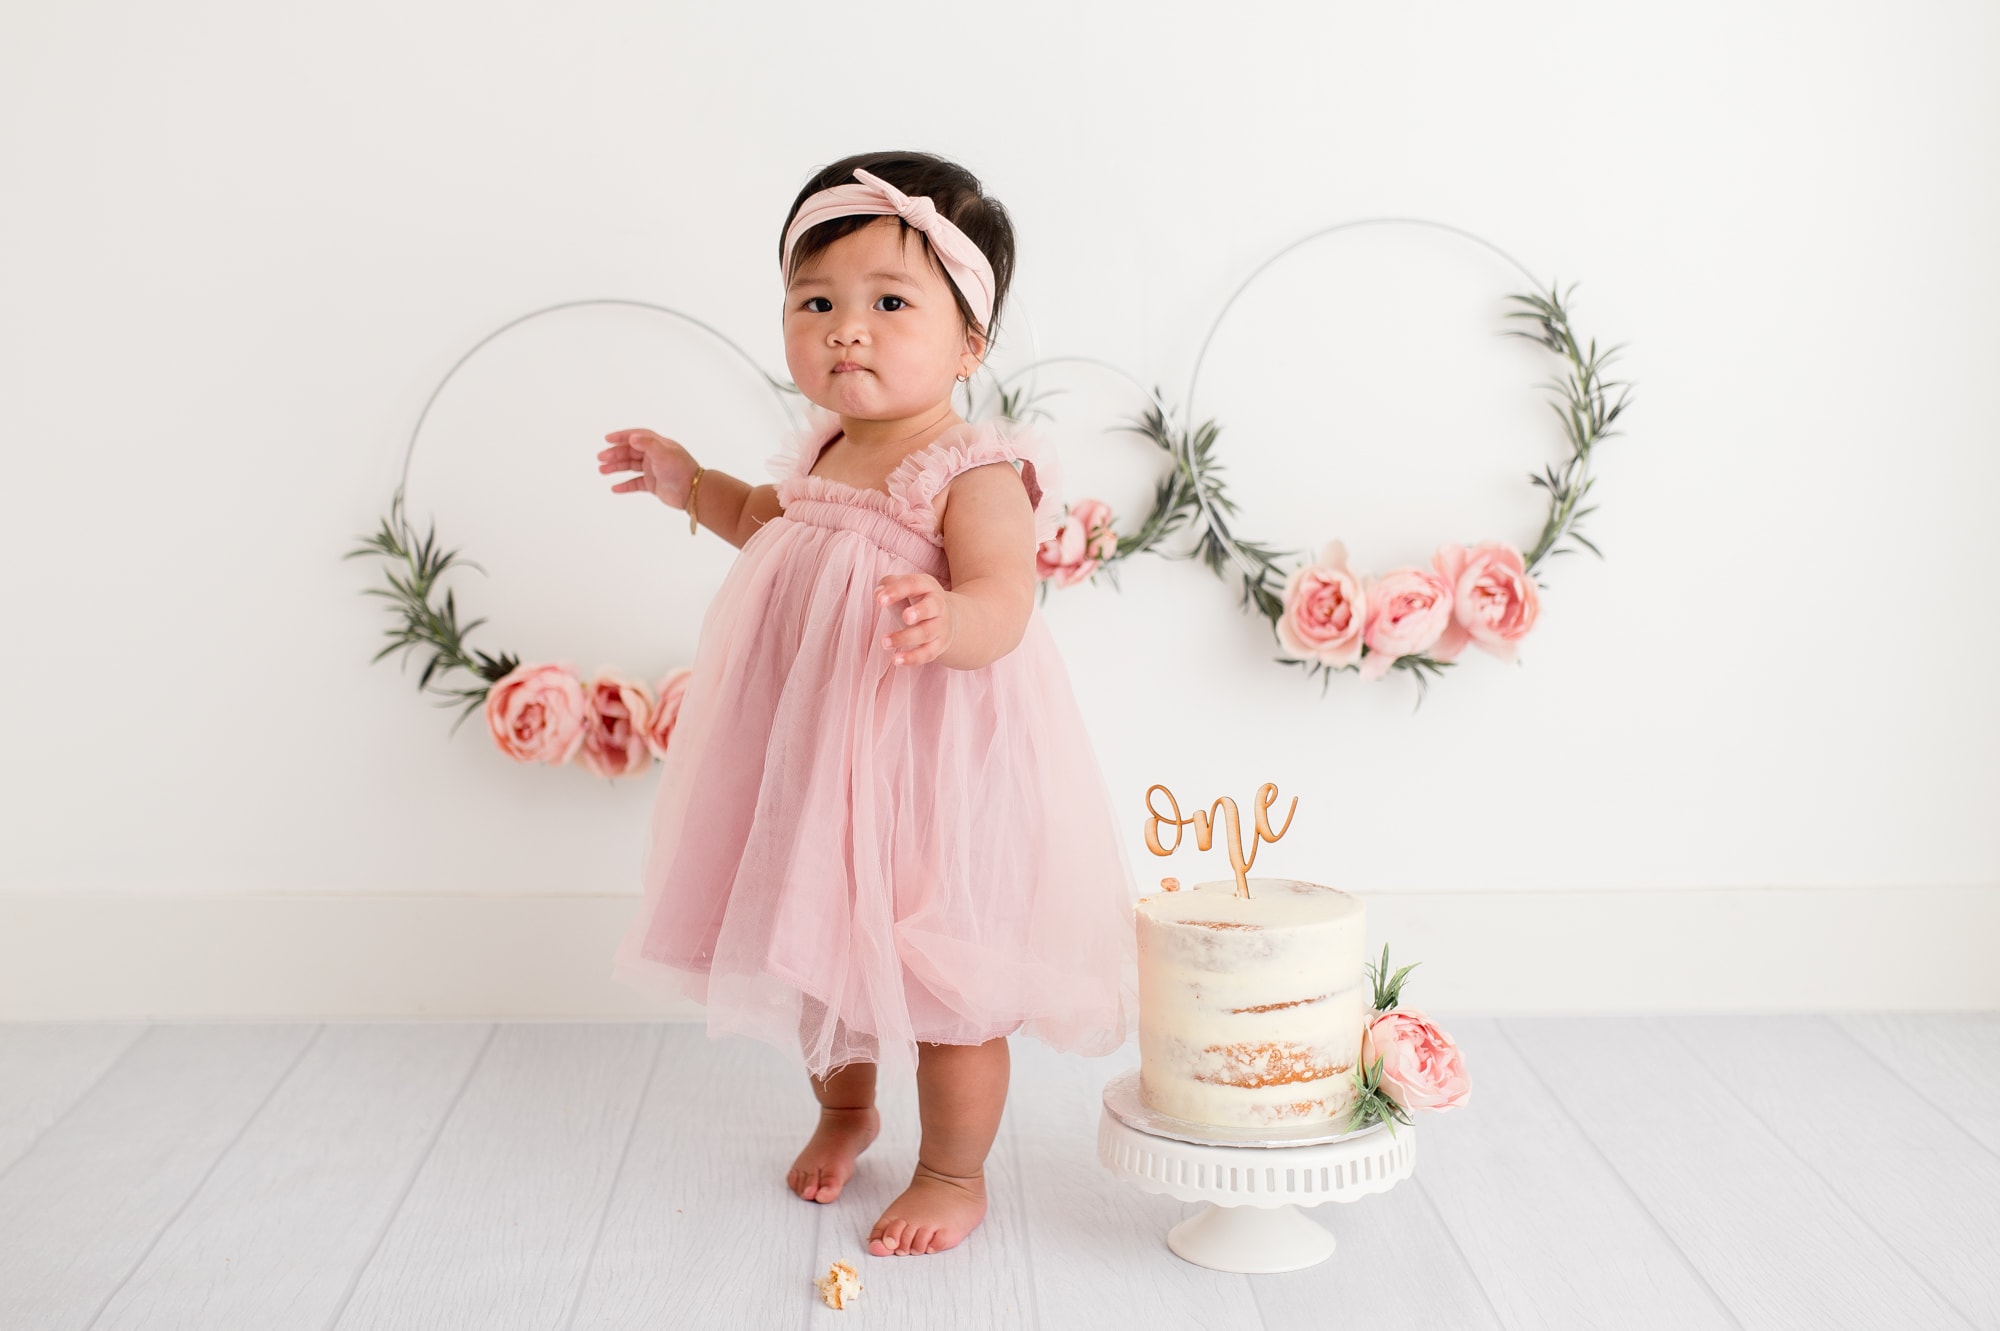 Toddler girl in pink dress stand next to cake and floral hoops at cake smash session.